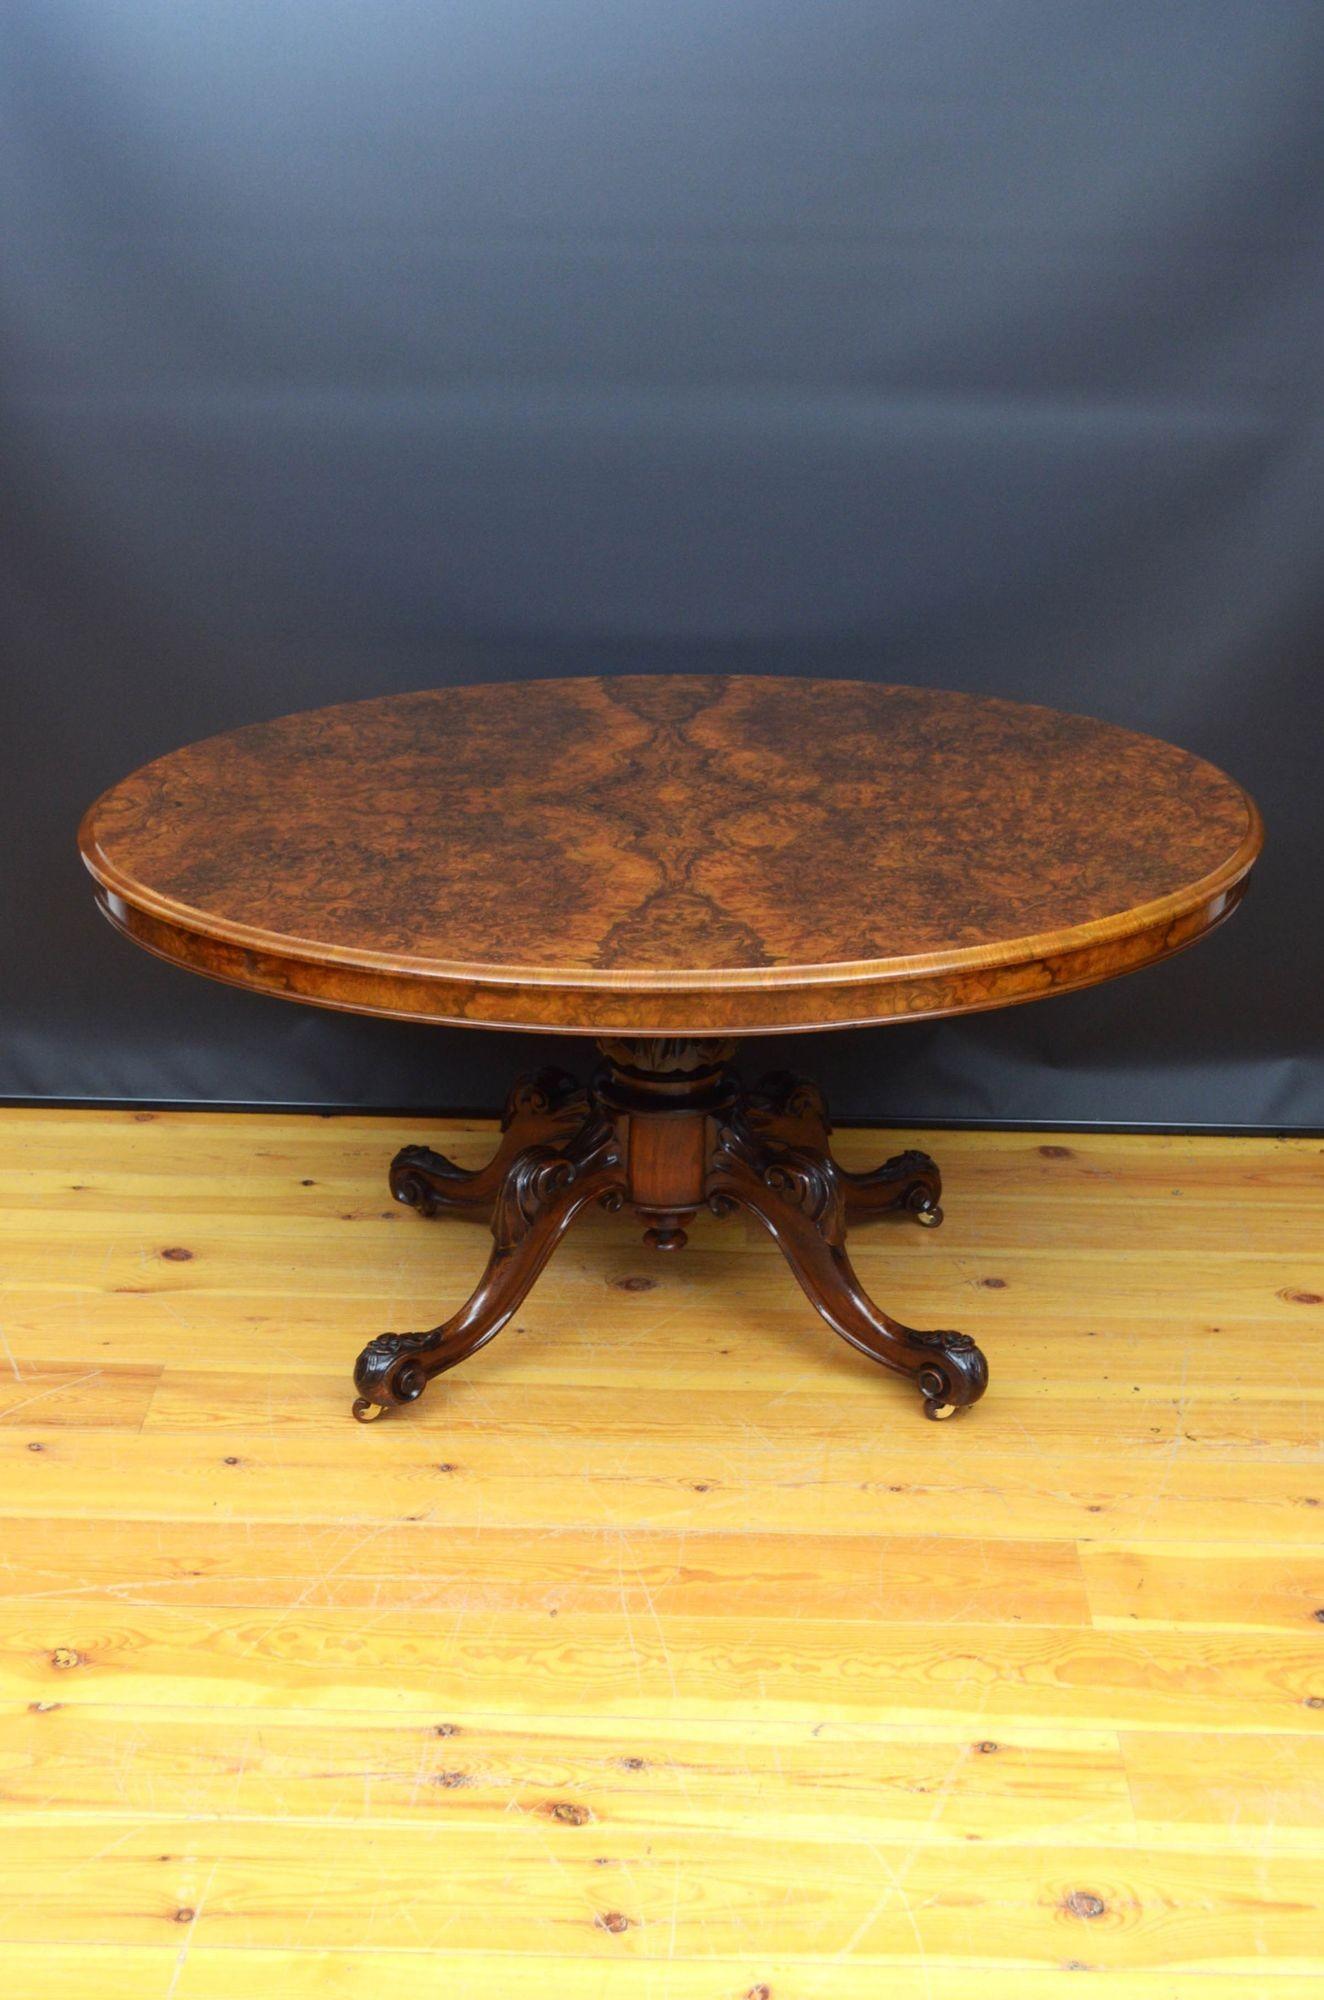 R037 Fine quality Victorian burr walnut dining table or centre table, having an oval top with outstanding walnut drain and moulded edge, raised on leaf carved vase shaped column terminating in four carved cabriole legs, all standing on castors. This